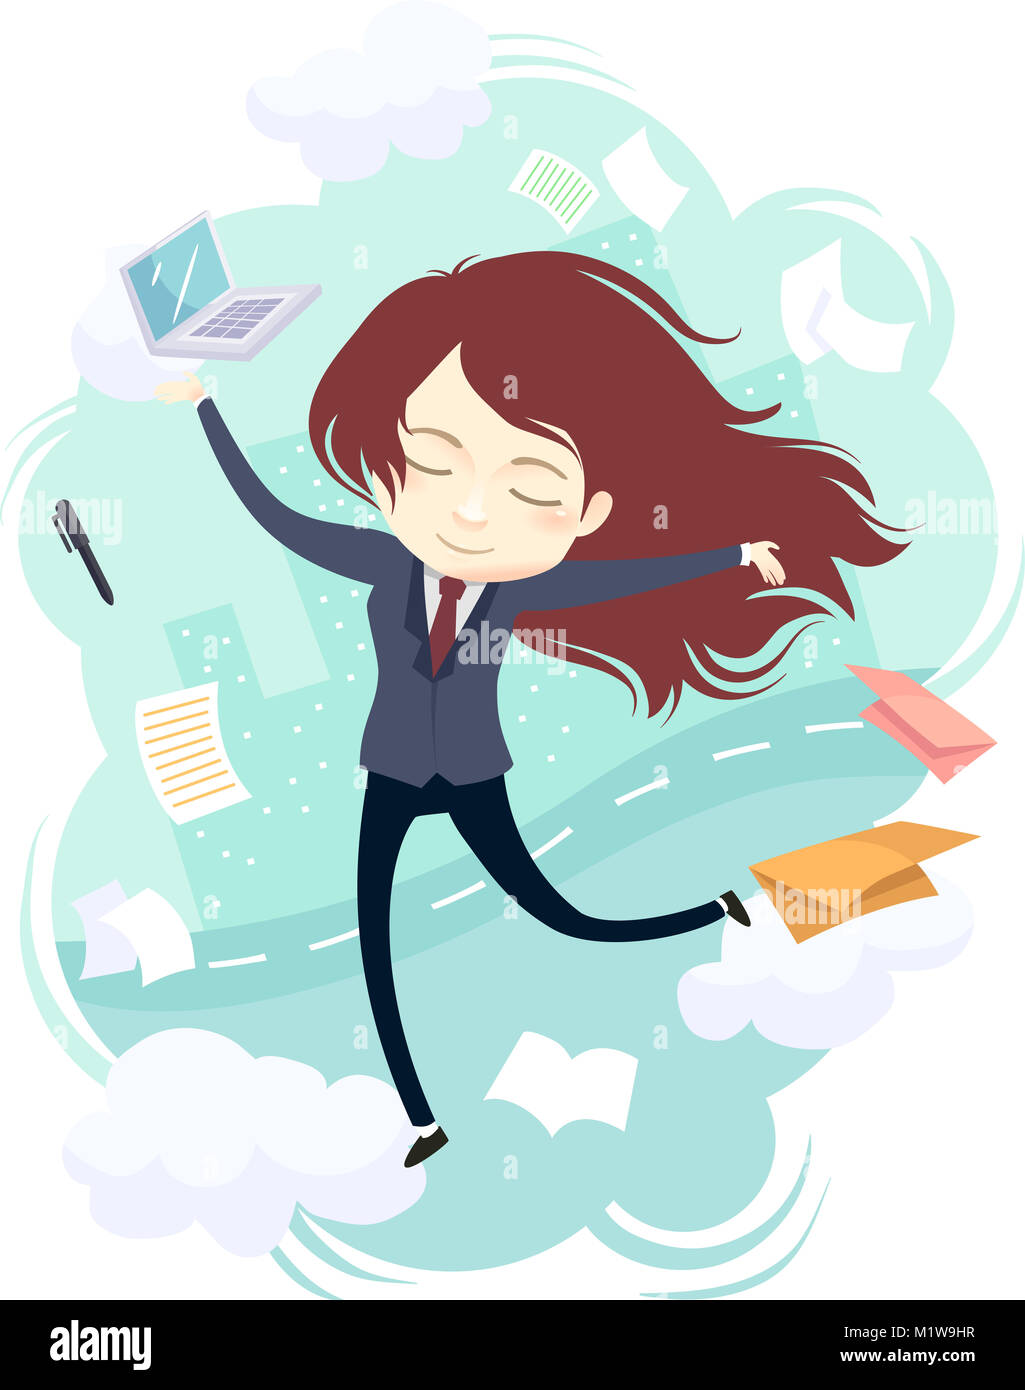 Illustration of an Office Girl Showing a Calm Expression Despite All the Work She Has to Do Stock Photo